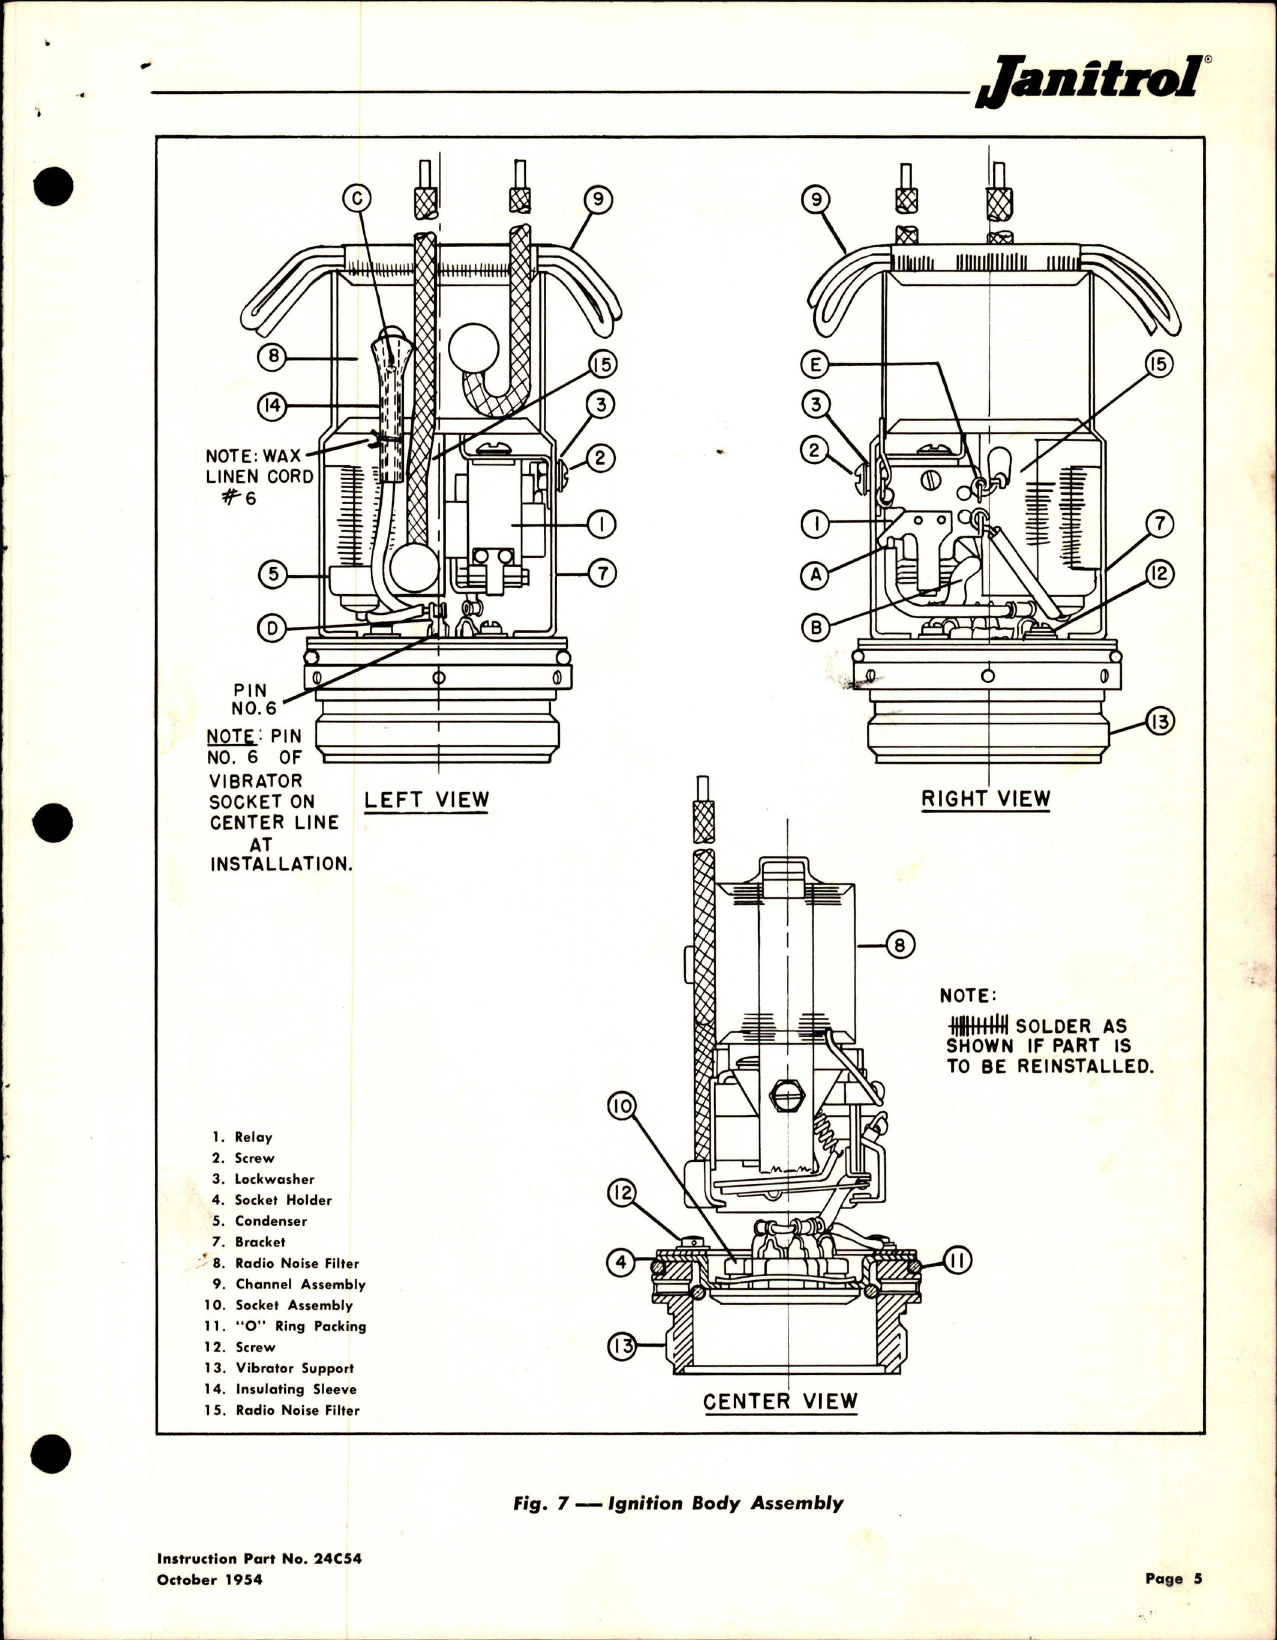 Sample page 5 from AirCorps Library document: Maintenance Instructions for Ignition Unit 11C30 